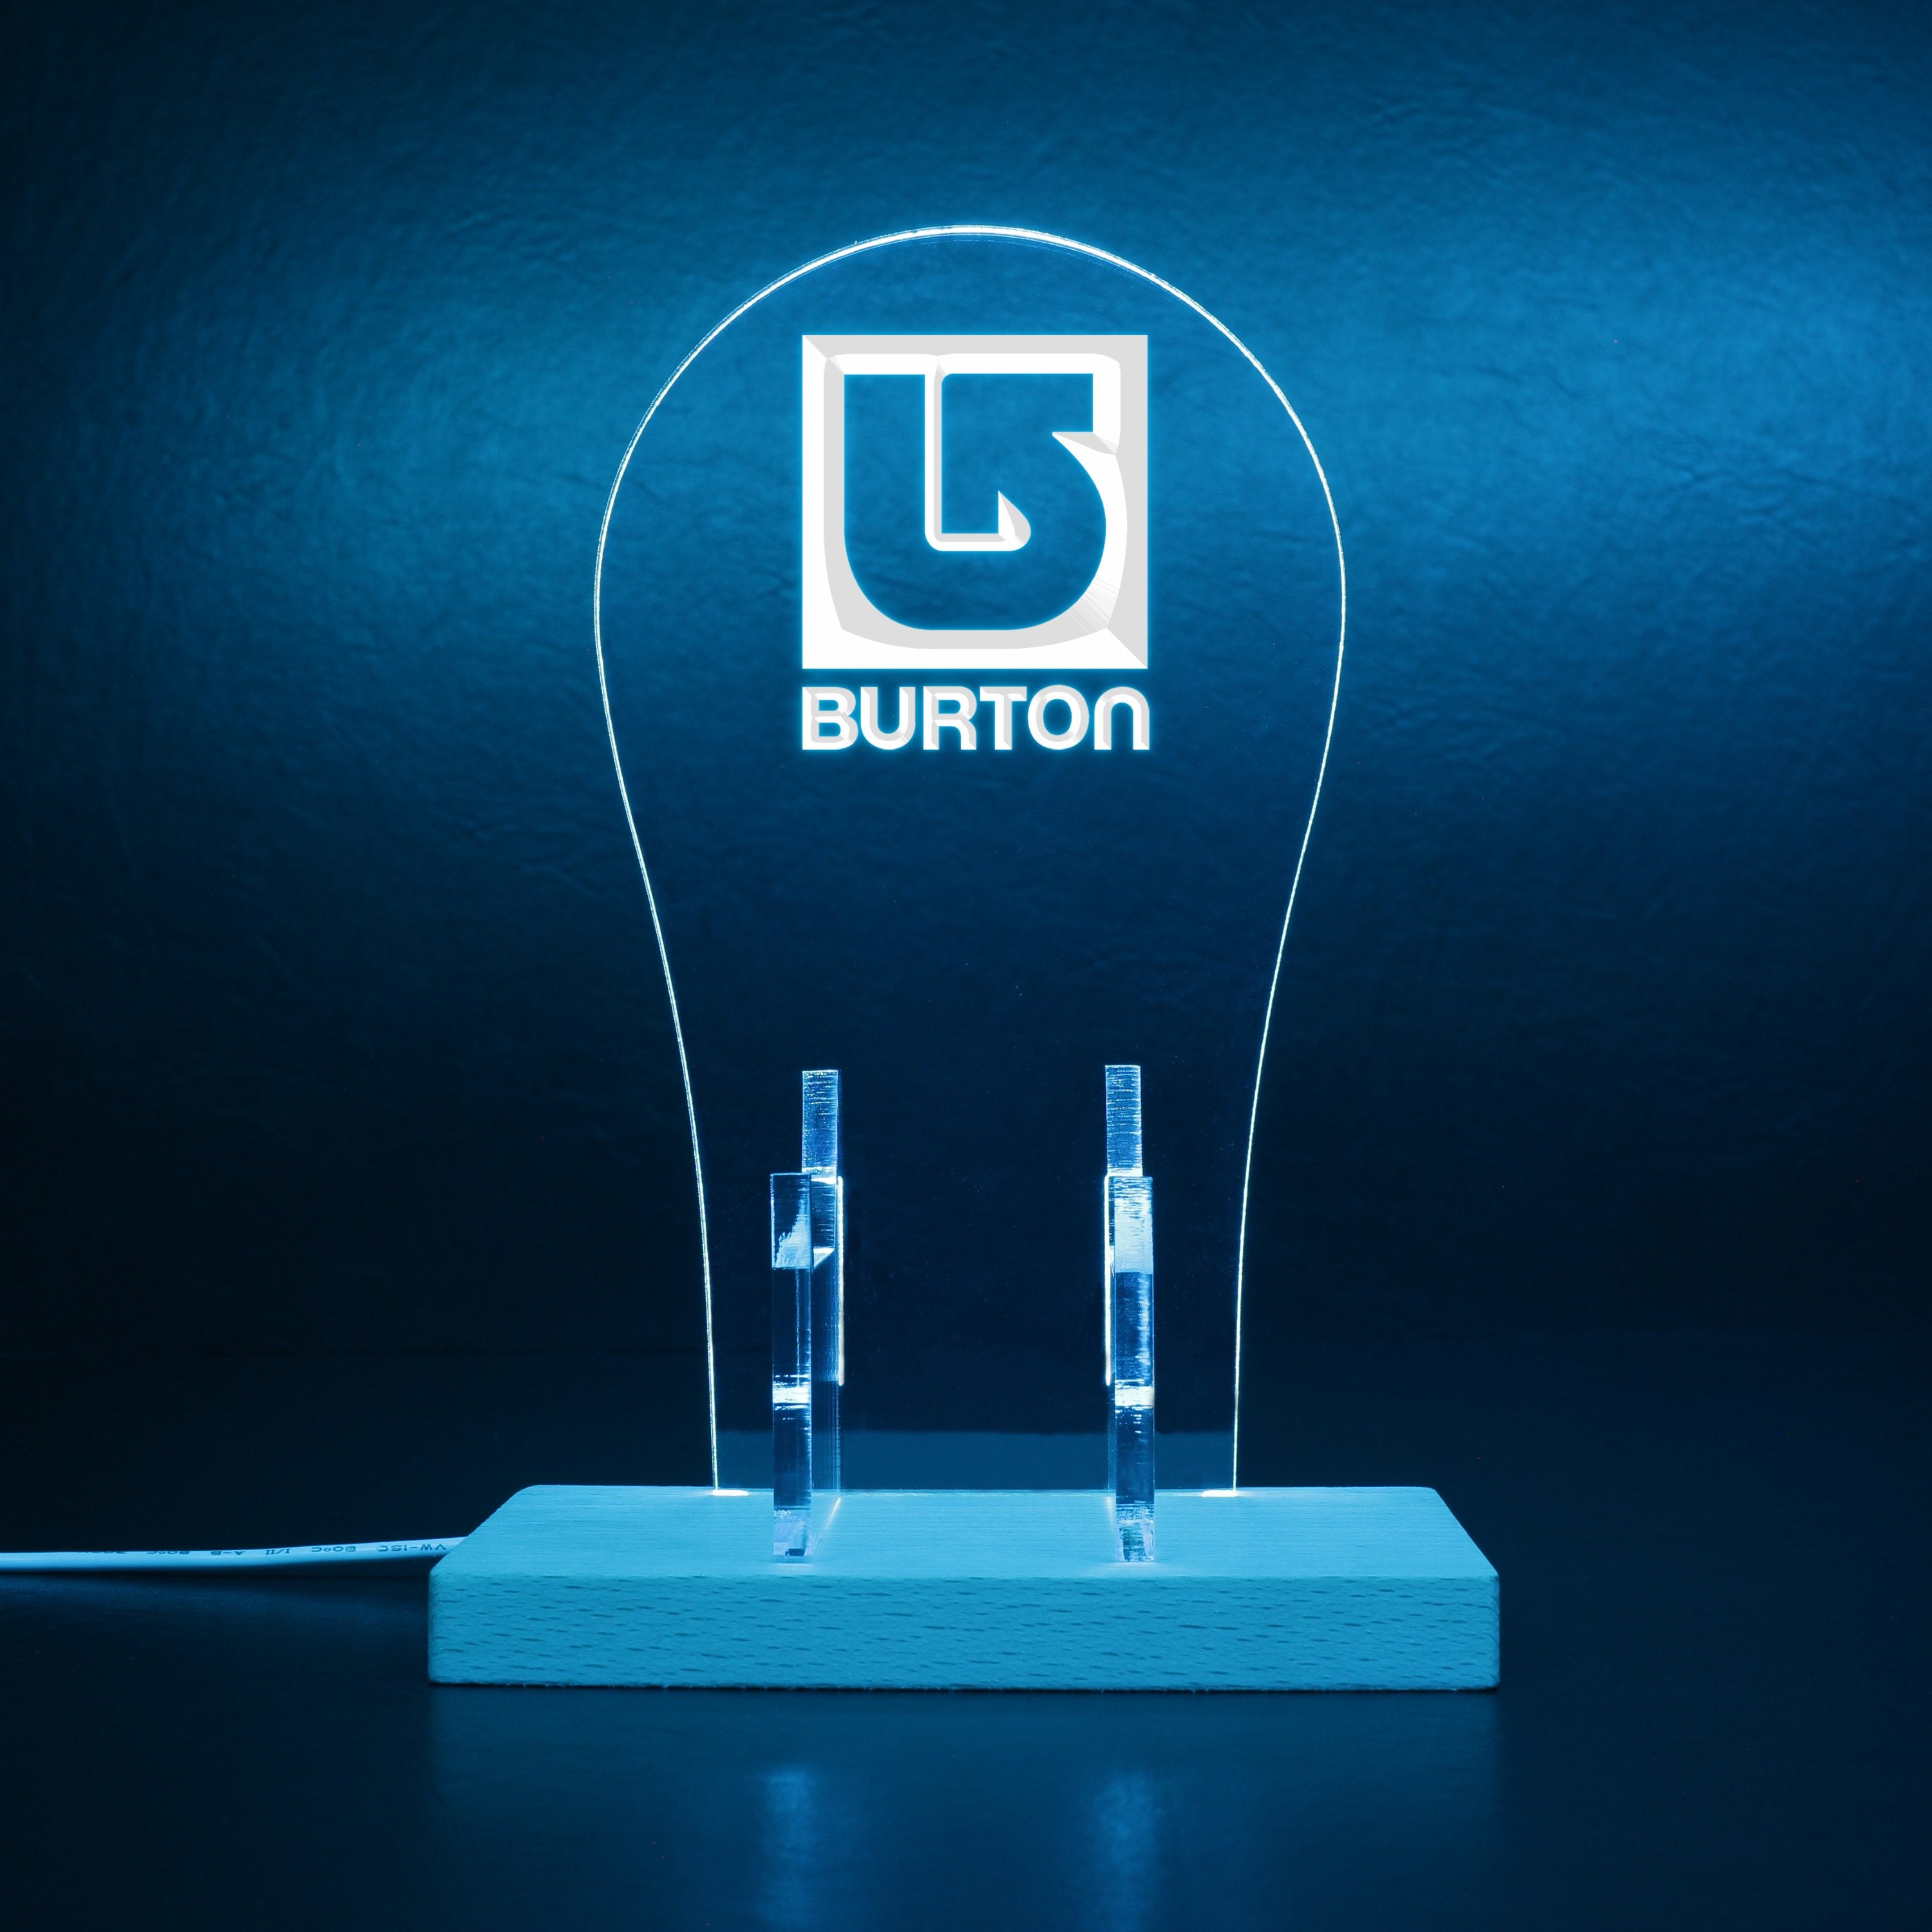 Burton Snowboards RGB LED Gaming Headset Controller Stand